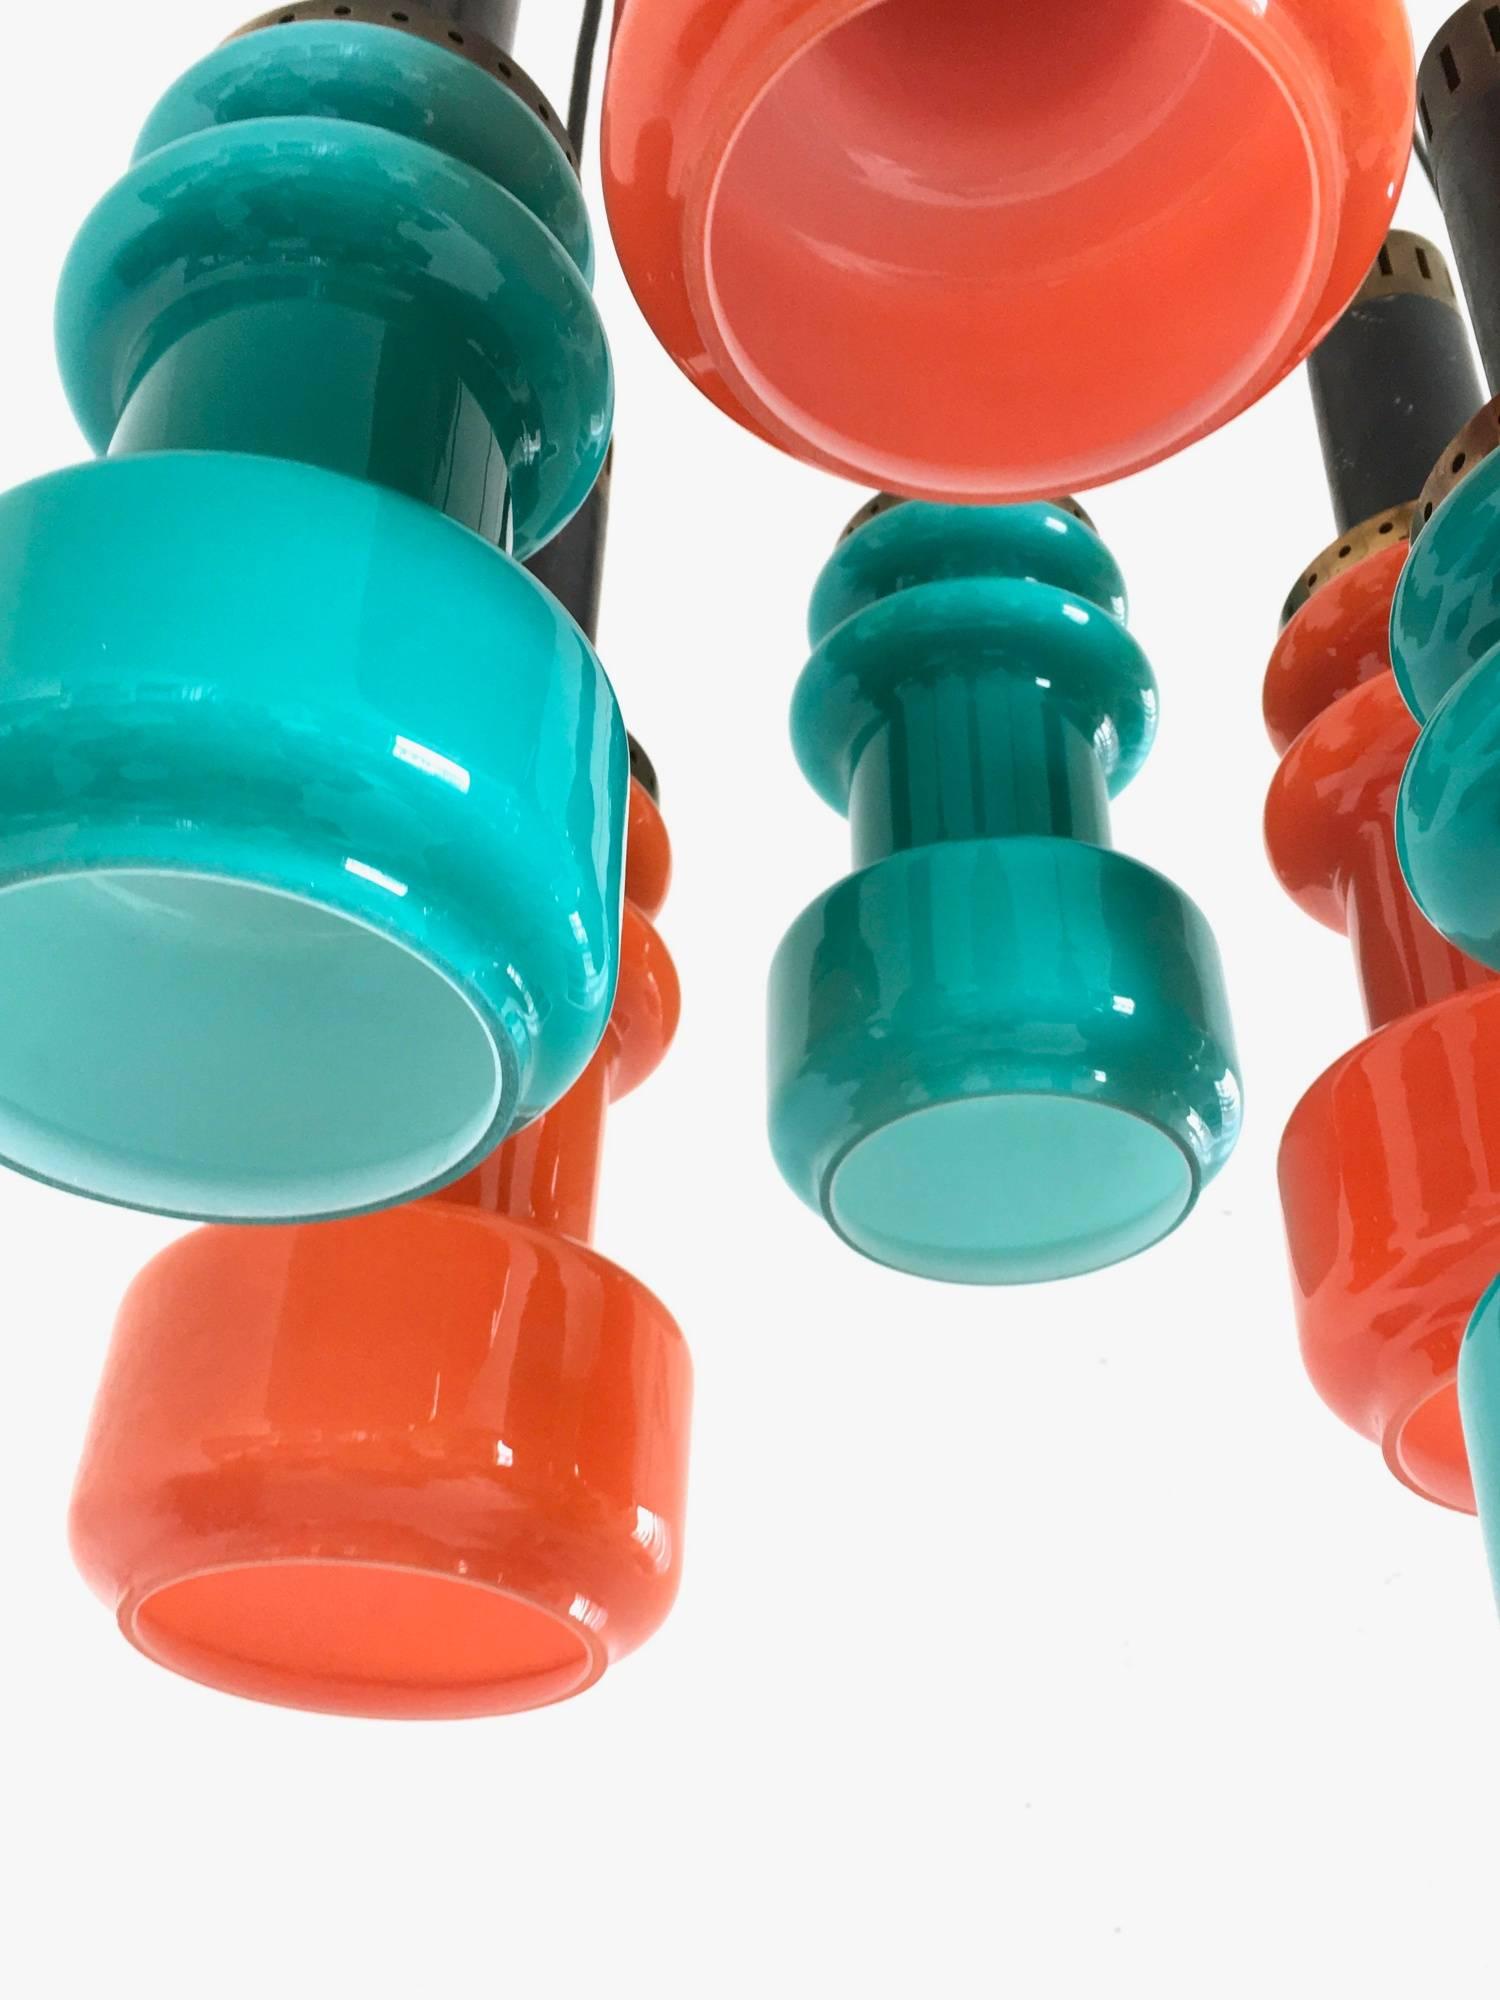 Mid-20th Century Six-Light Teal and Orange Chandelier by Stilnovo, Italy, 1960s